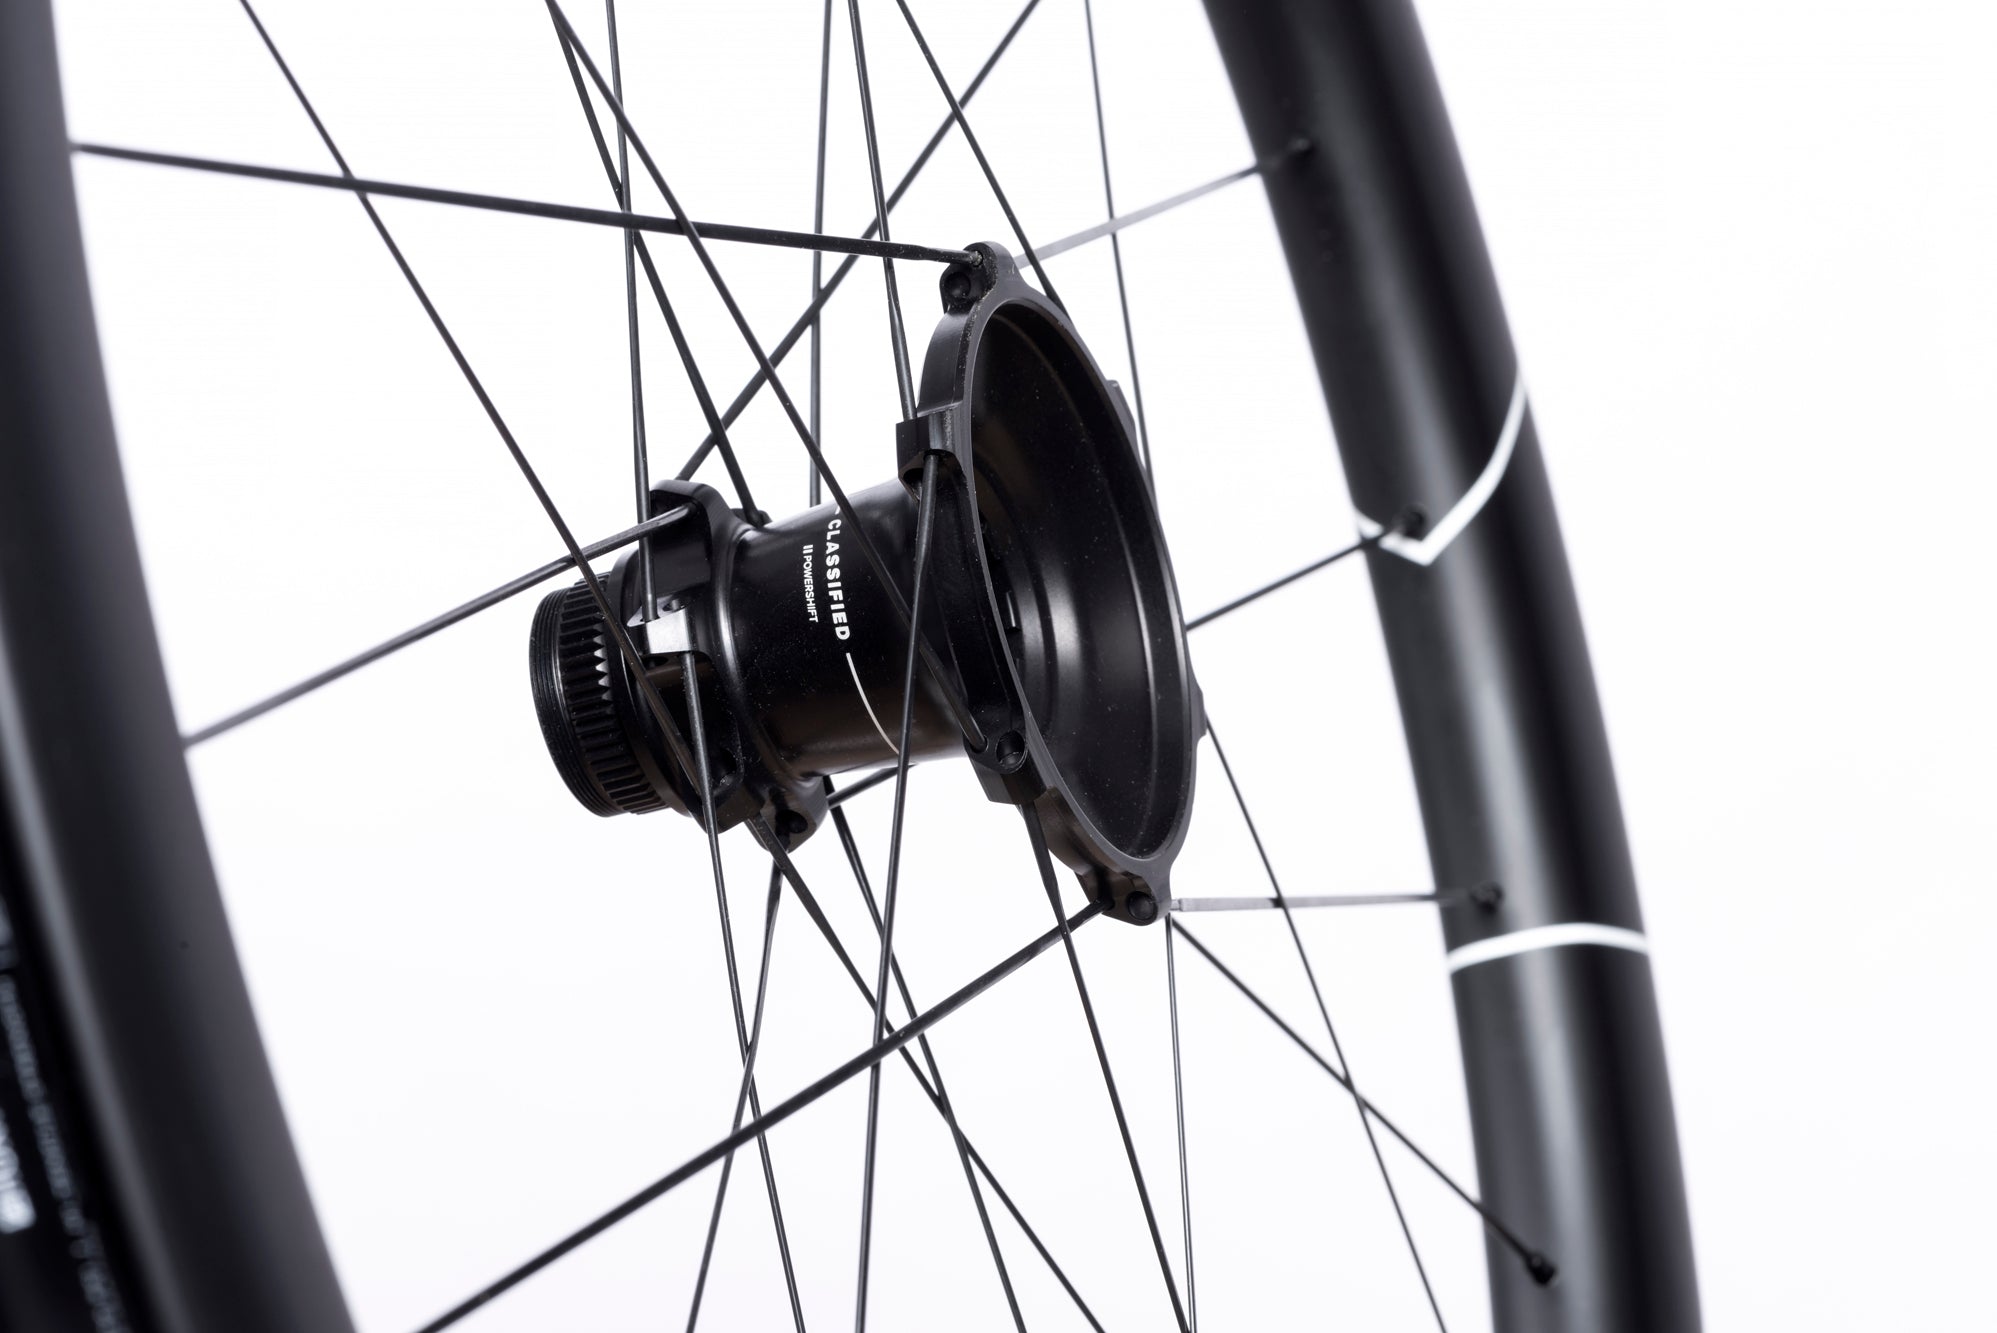 <h1>Classified Rear Hub</h1><i>Classified rear hubshell has been fitted to this wheelset by hand, and will arrive ready to fit a Powershift hub system.</i>